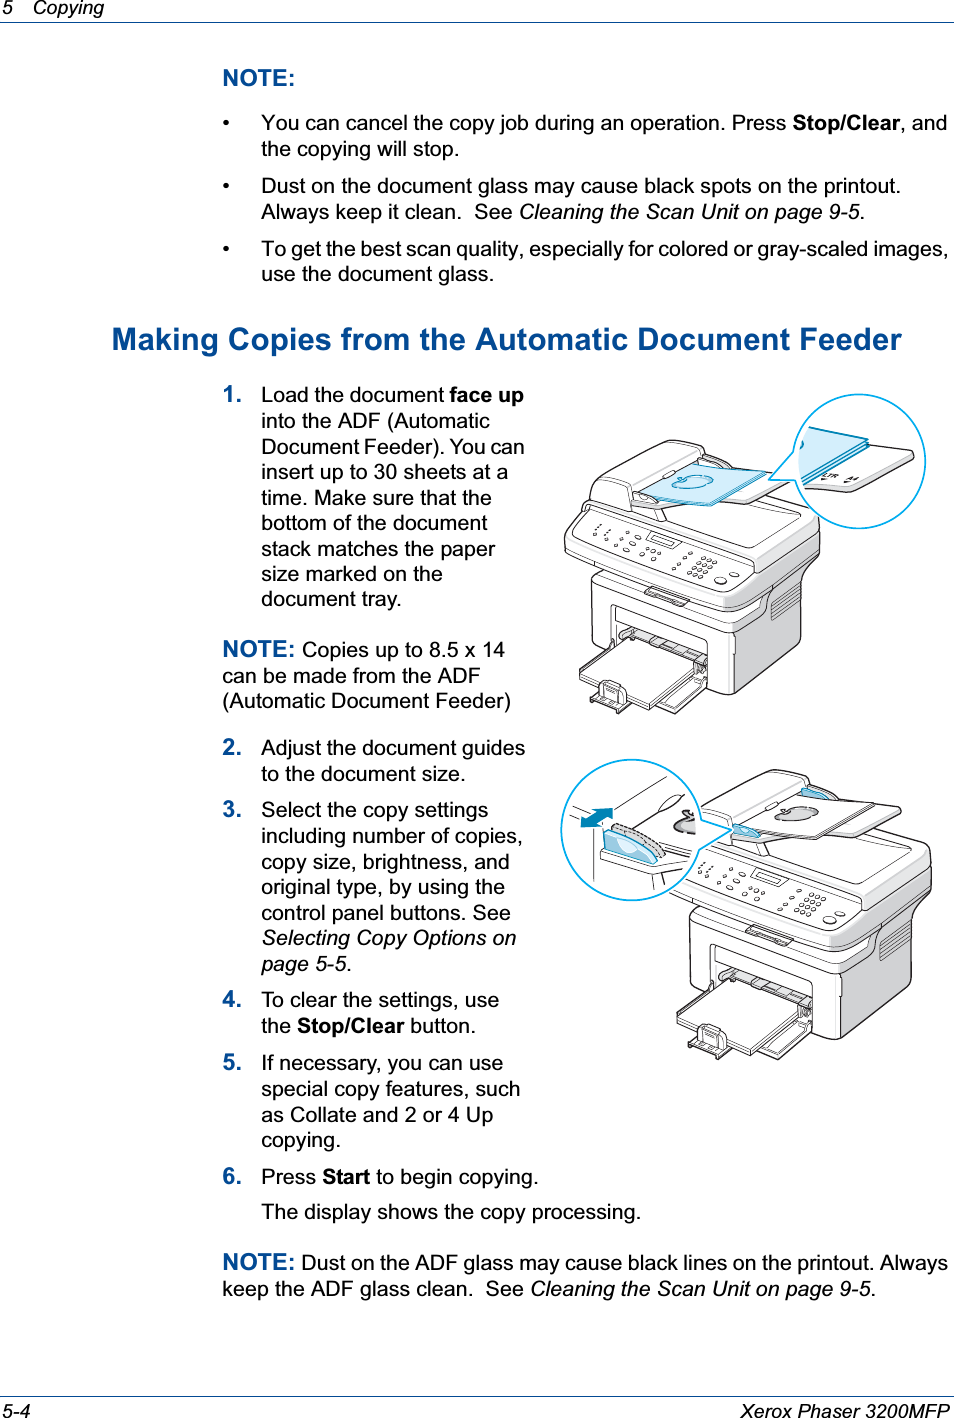 5 Copying 5-4 Xerox Phaser 3200MFPNOTE: • You can cancel the copy job during an operation. Press Stop/Clear, and the copying will stop.• Dust on the document glass may cause black spots on the printout. Always keep it clean.  See Cleaning the Scan Unit on page 9-5.• To get the best scan quality, especially for colored or gray-scaled images, use the document glass.Making Copies from the Automatic Document Feeder1. Load the document face upinto the ADF (Automatic Document Feeder). You can insert up to 30 sheets at a time. Make sure that the bottom of the document stack matches the paper size marked on the document tray.NOTE: Copies up to 8.5 x 14 can be made from the ADF (Automatic Document Feeder)2. Adjust the document guides to the document size.3. Select the copy settings including number of copies, copy size, brightness, and original type, by using the control panel buttons. See Selecting Copy Options on page 5-5.4. To clear the settings, use the Stop/Clear button.5. If necessary, you can use special copy features, such as Collate and 2 or 4 Up copying. 6. Press Start to begin copying. The display shows the copy processing.NOTE: Dust on the ADF glass may cause black lines on the printout. Always keep the ADF glass clean.  See Cleaning the Scan Unit on page 9-5.